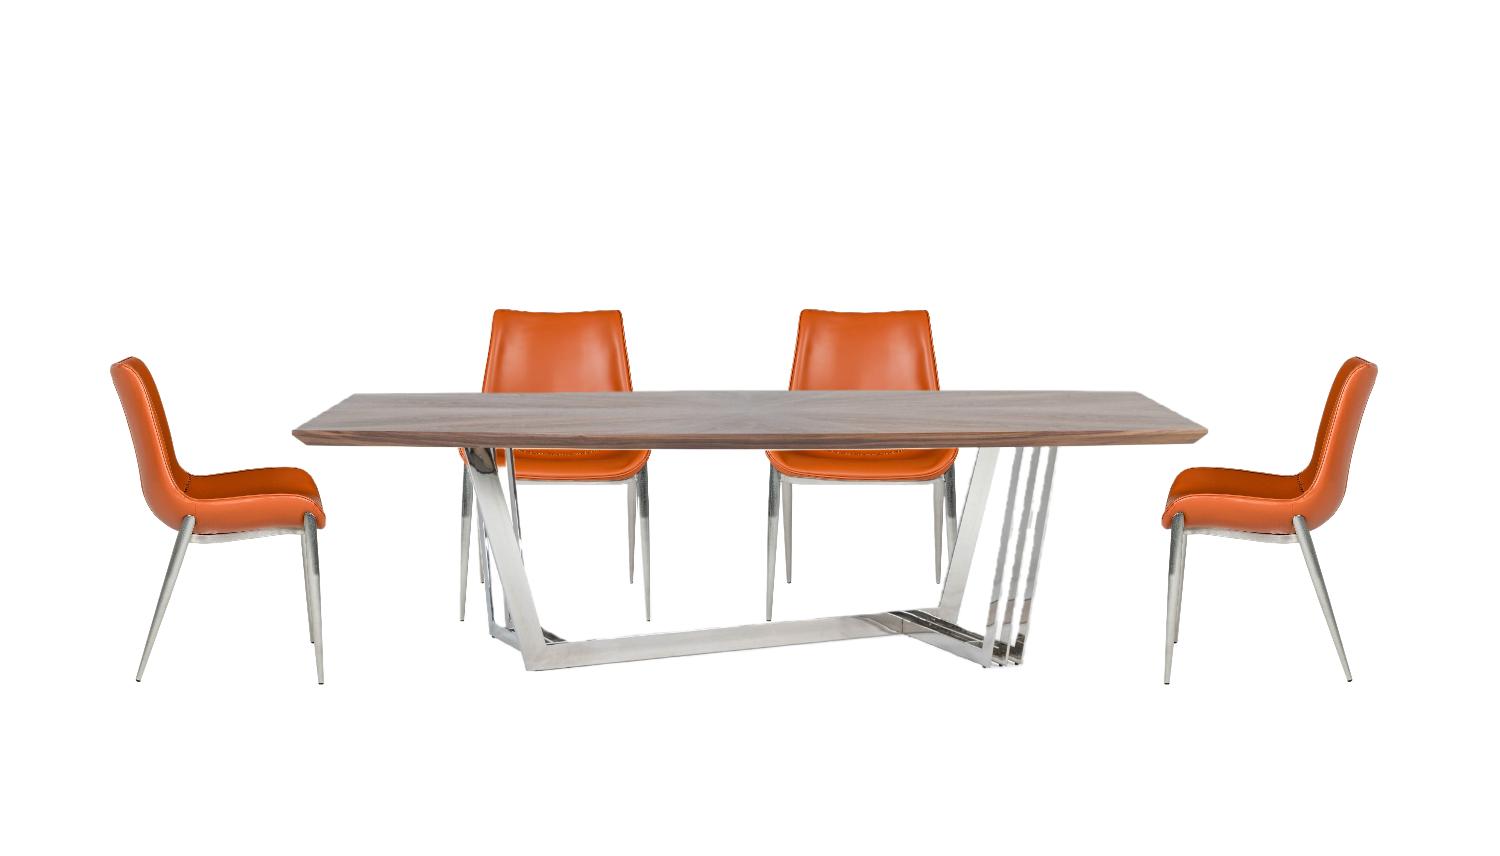 Contemporary, Modern Dining Room Set Gilroy Holt VGBBMI2003T-WAL-DT-5pcs in Chrome, Walnut Leather